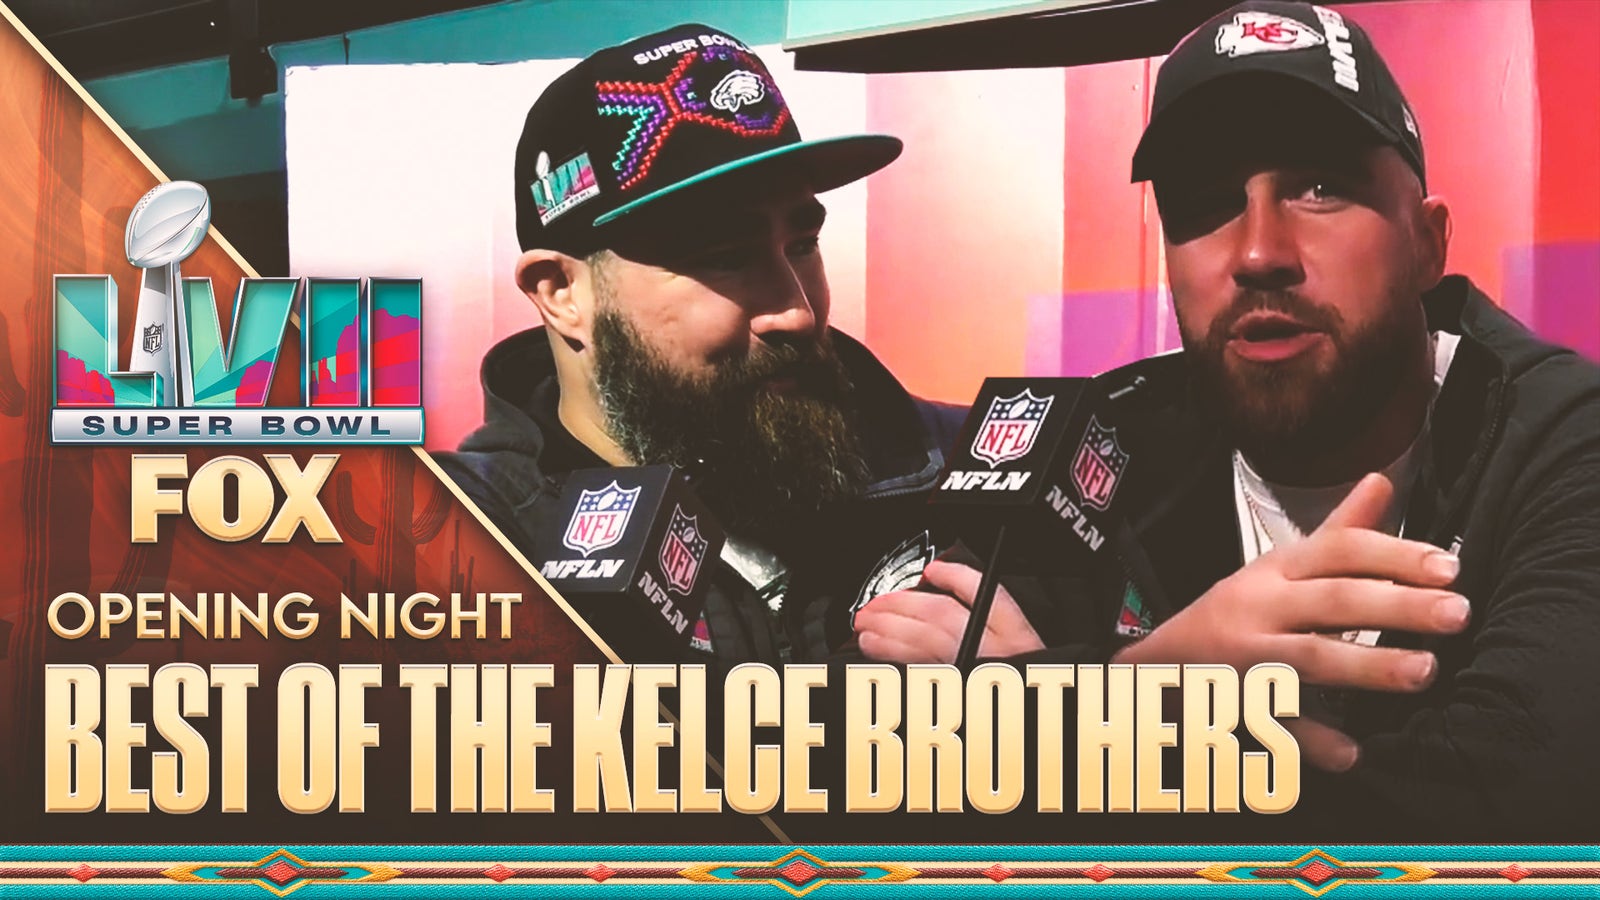 Jason and Travis Kelce's hilarious moments from Super Bowl's opening night